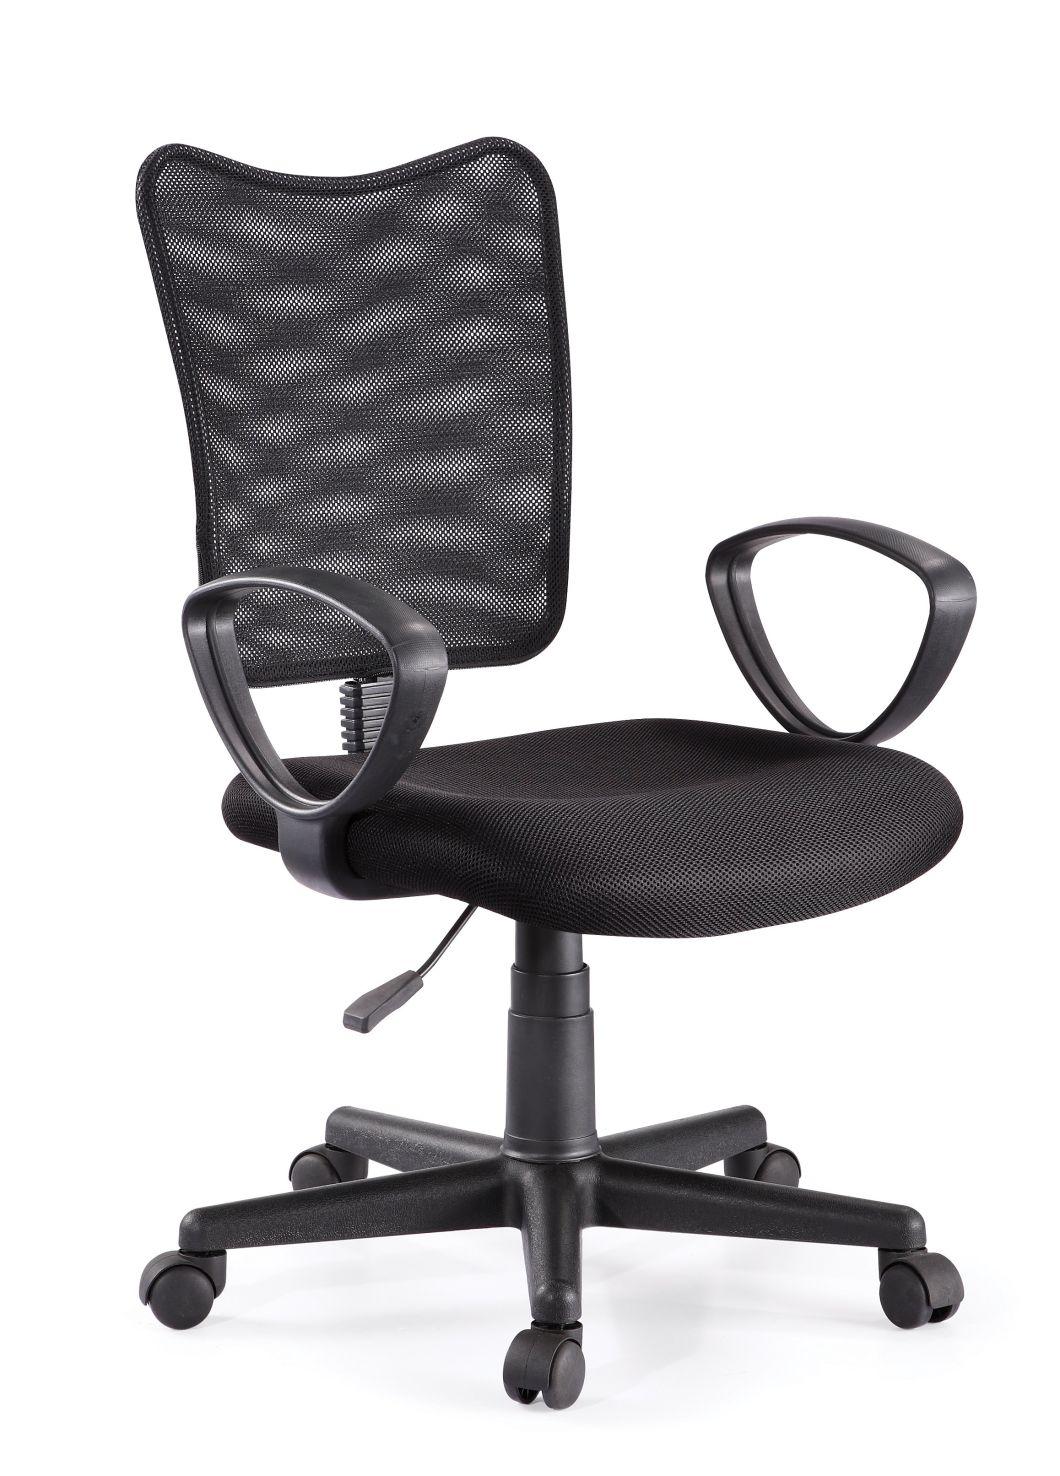 Metal Frame Mesh Back Office Chair Comfortable Chair High Quality